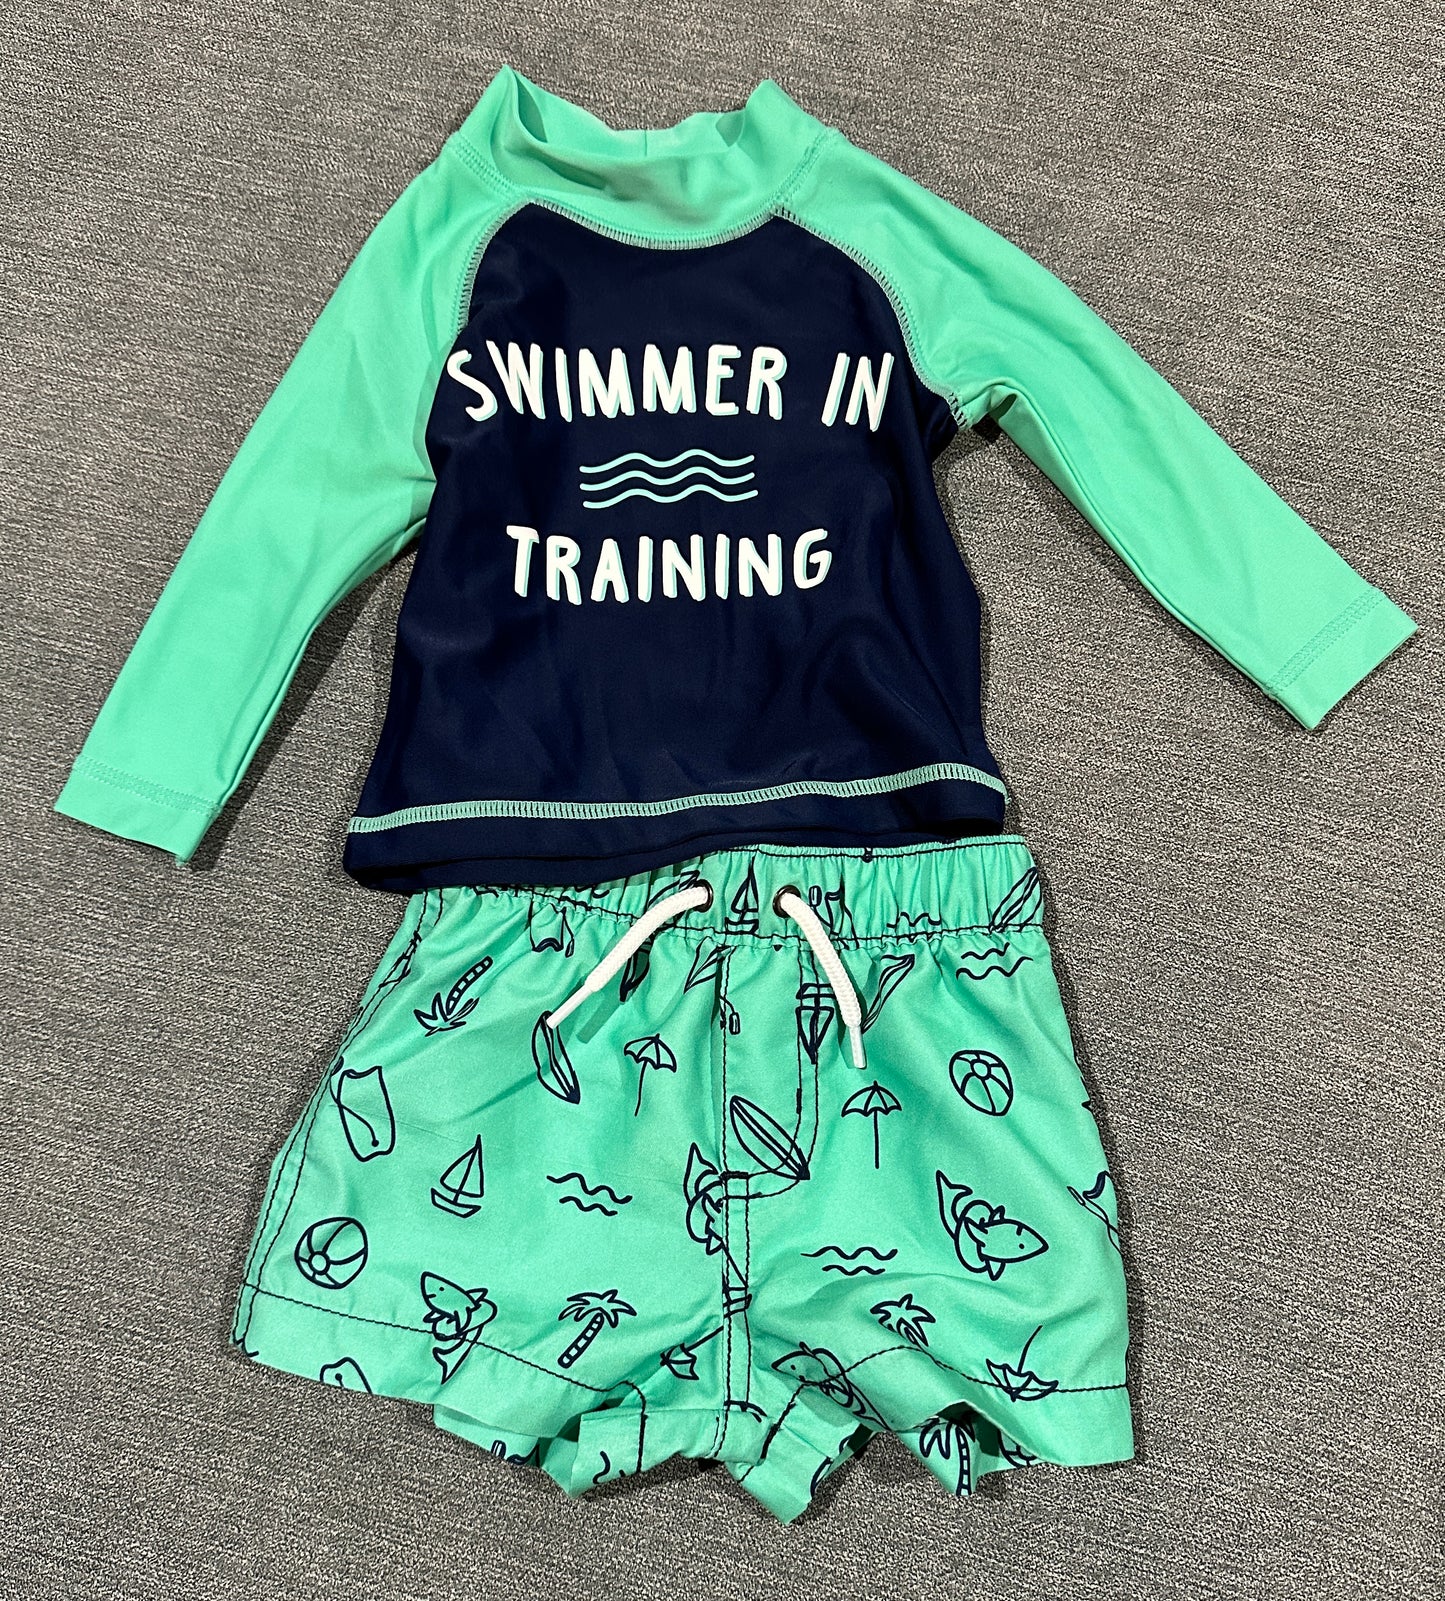 Boys swim trunks and rash guard, Carter’s, 3 months, worn once